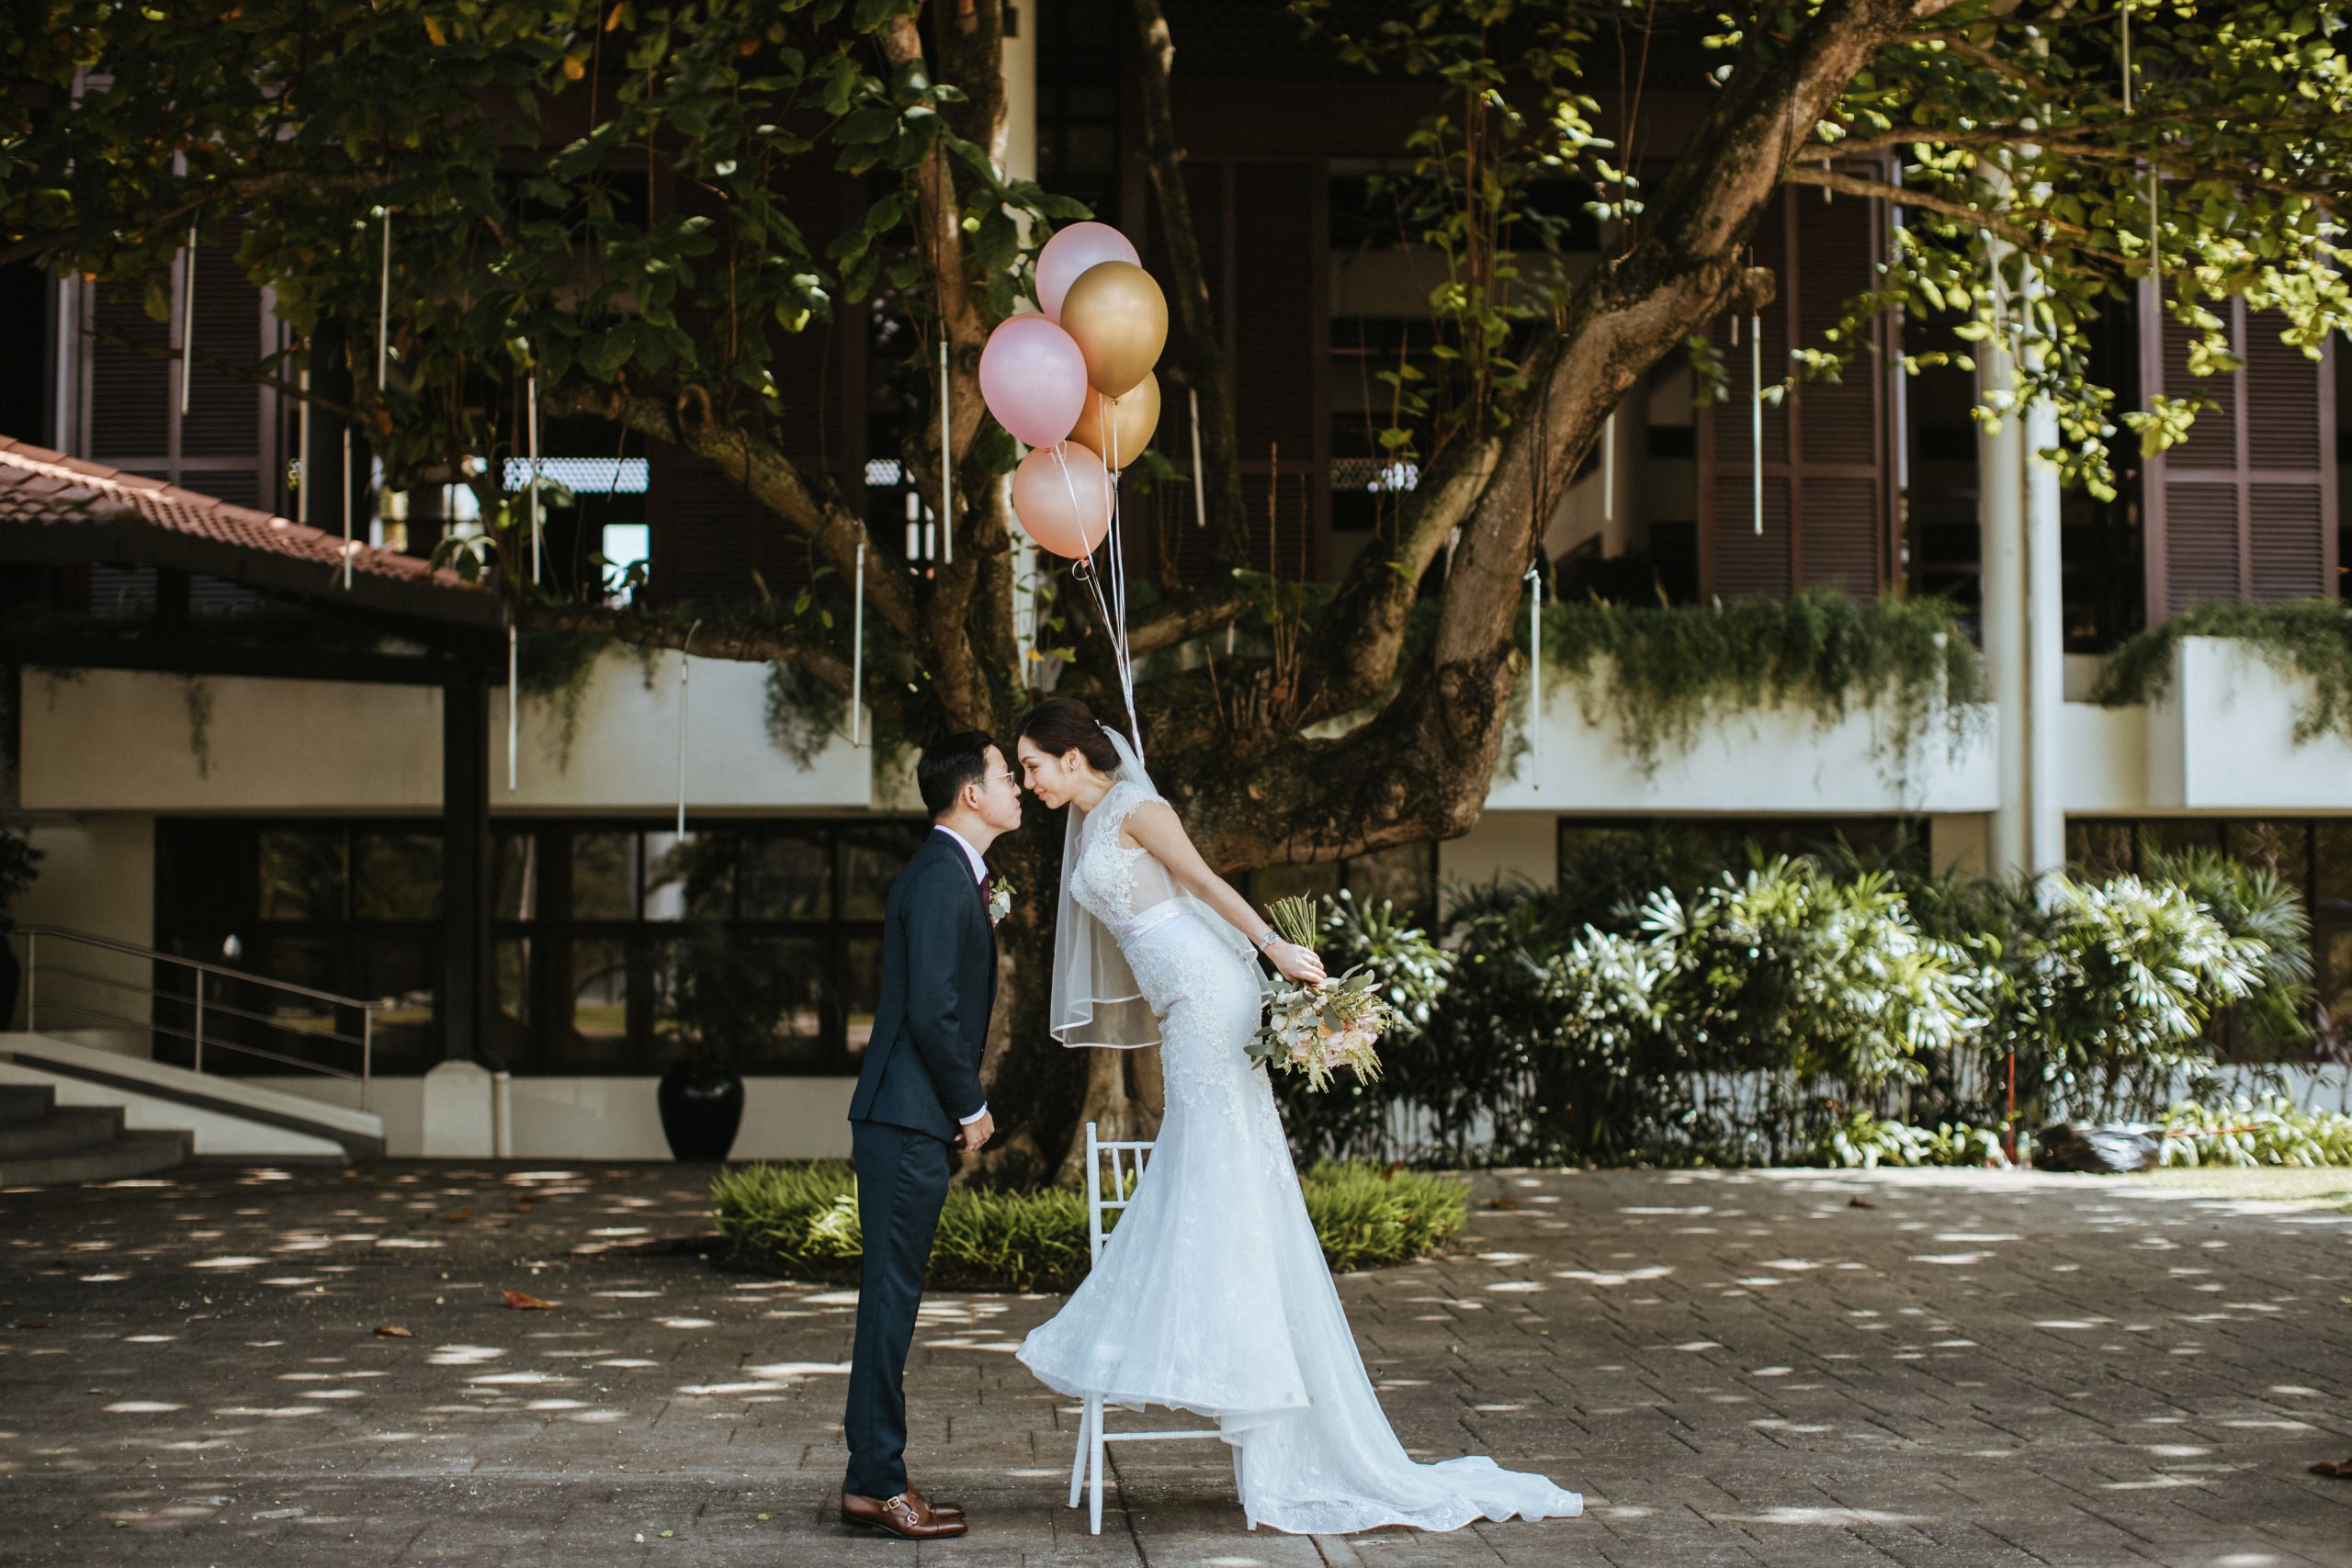 Garden Romantic Rustic Rosy Golden Wedding at The Saujana Hotel Subang Kuala Lumpur malaysia cliff choong the cross effects kevin tan destination portrait and wedding photographer malaysia kuala lumpur bride and groom couple kiss romantic intimate moment scene vows exchange